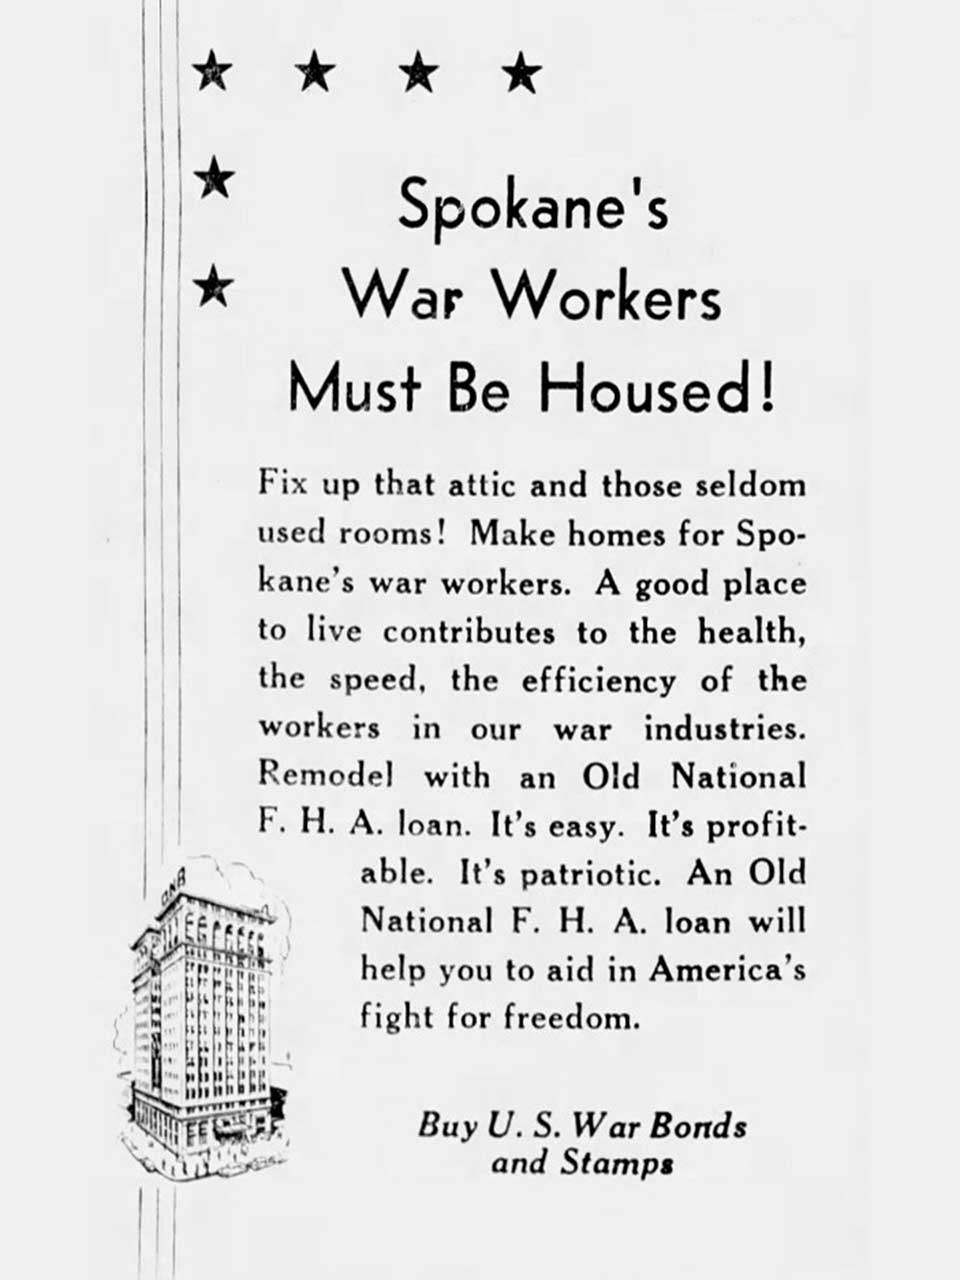 A flyer asking Spokane residents to support the war effort by adding dwelling units to their home. The title reads, "Spokane’s War Workers Must Be Housed!"